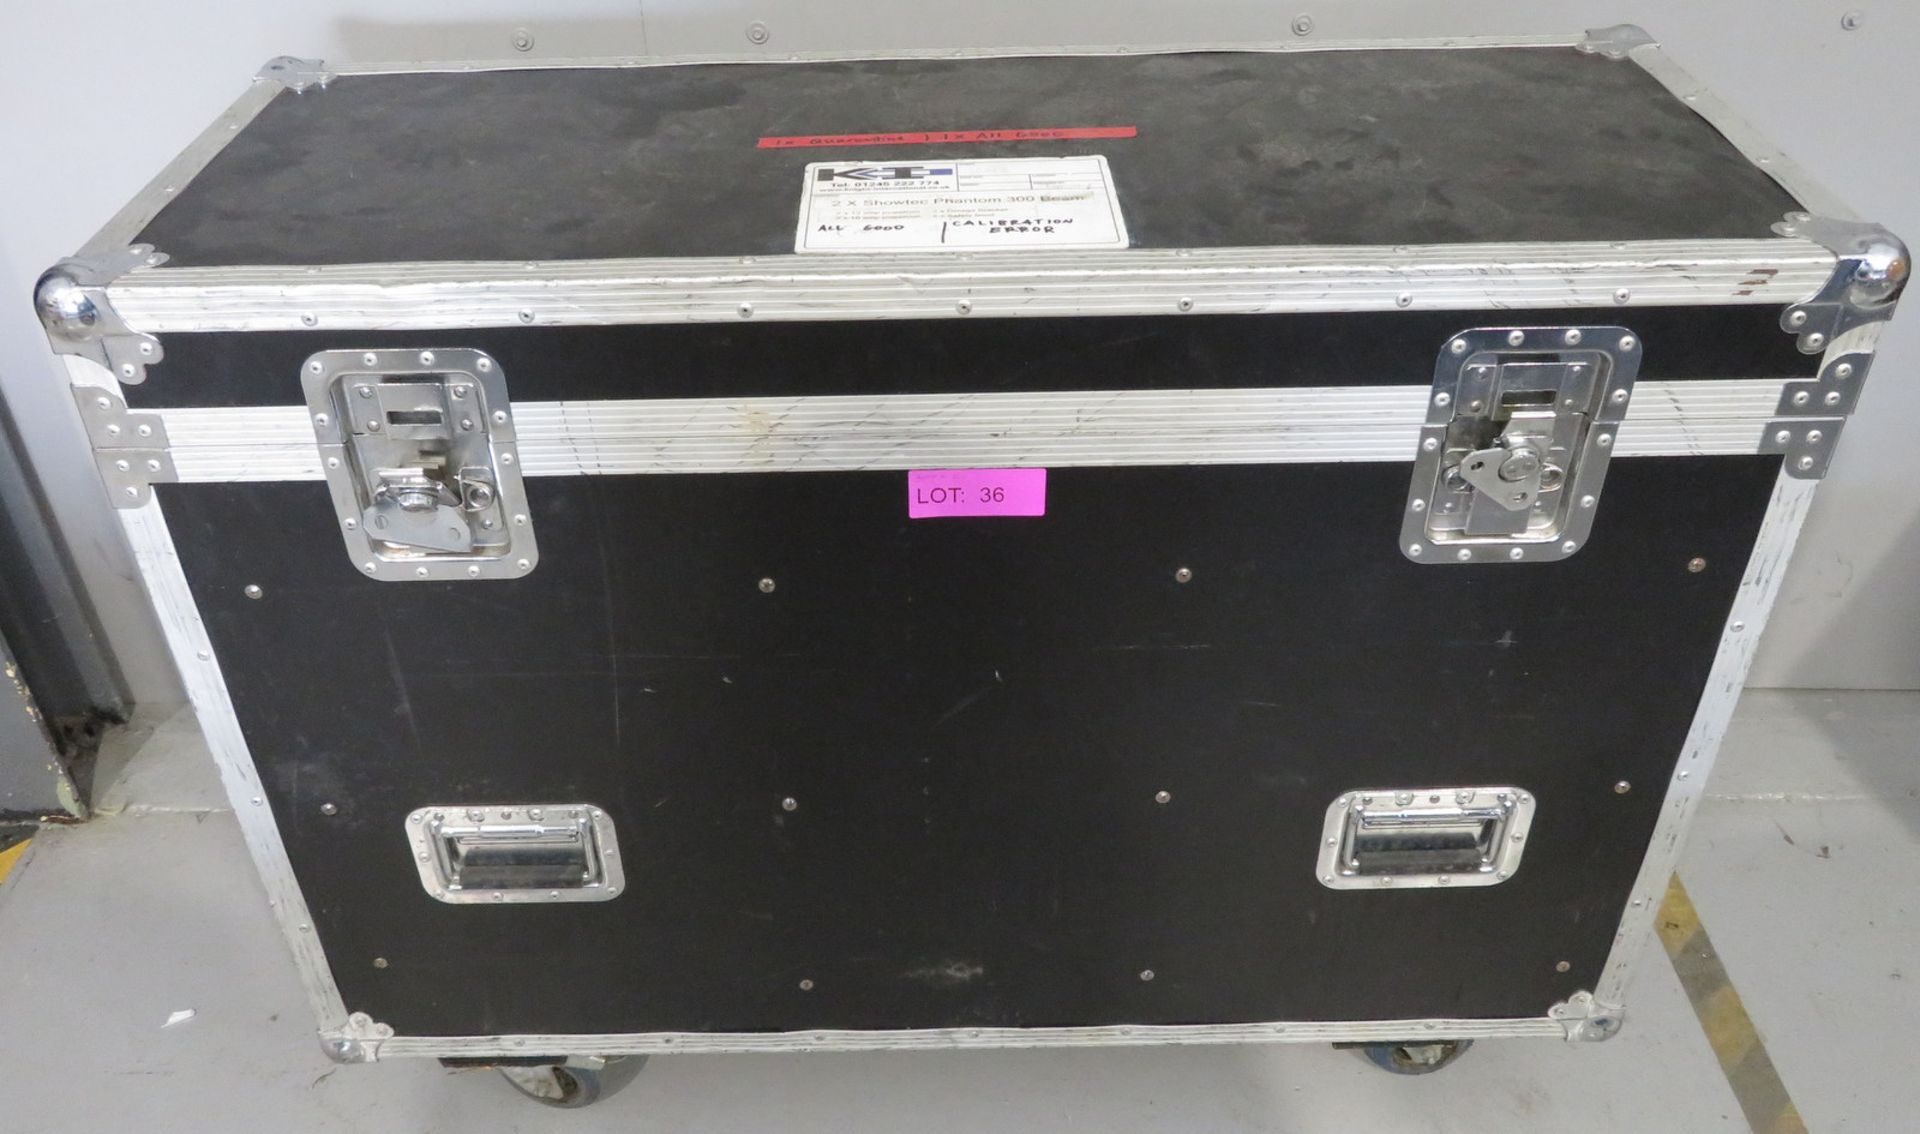 Pair of Showtec Phantom 300 Beams in flightcase. Includes hanging clamps and safety bonds. - Image 8 of 8